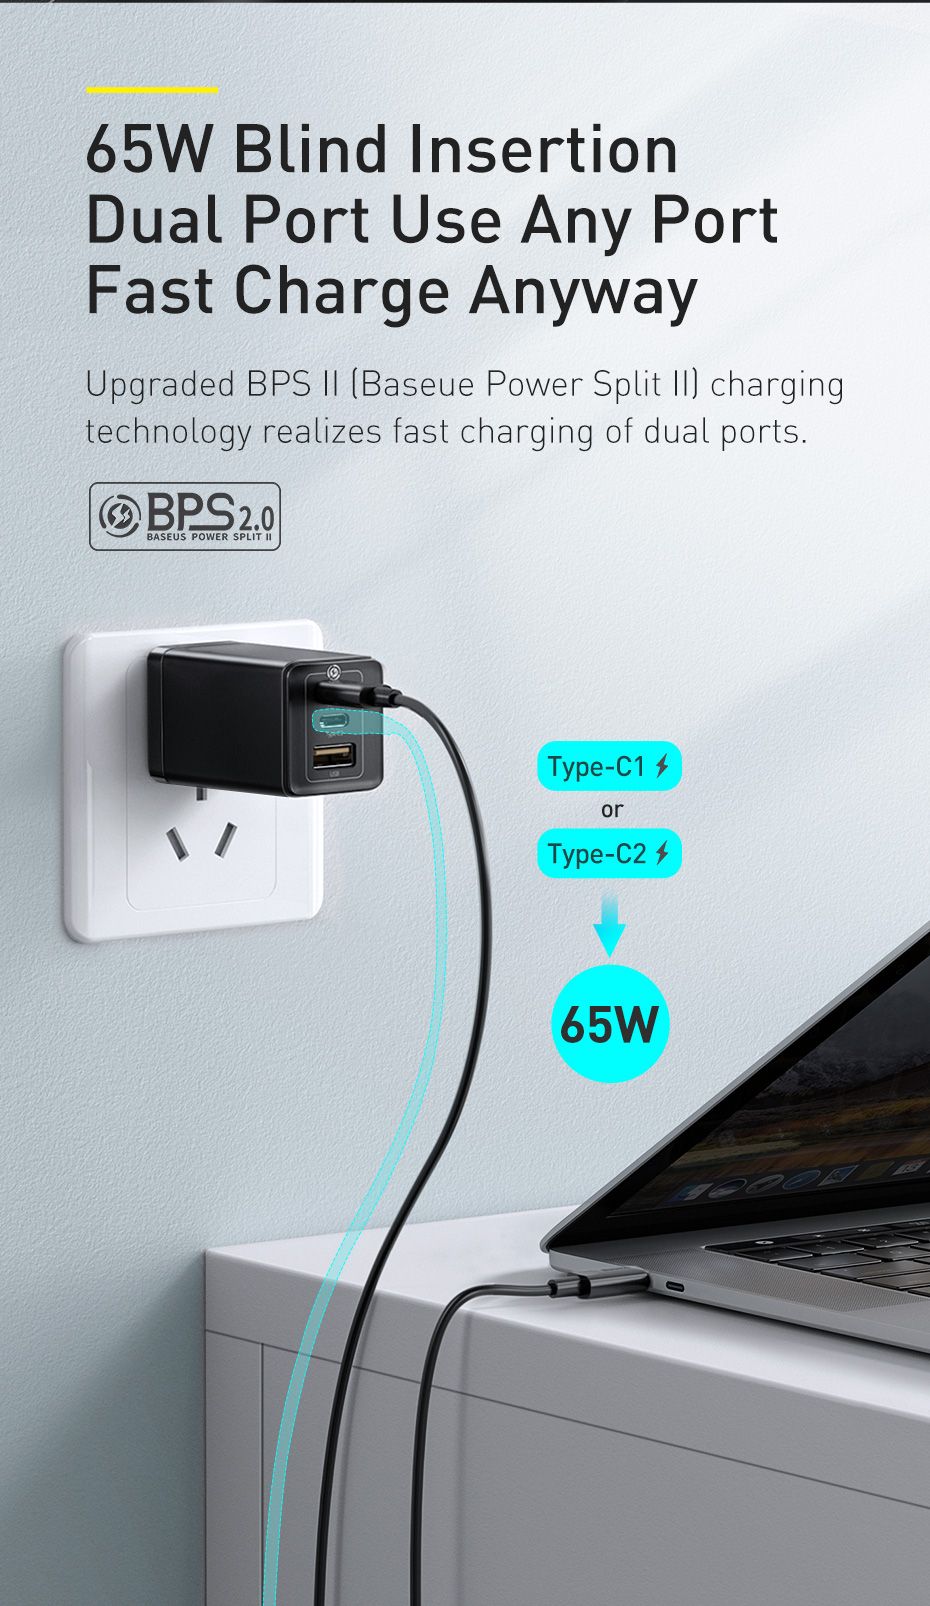 Baseus-65W-GaN2-Pro-Type-C-PD-Wall-Charger-3-Port-Quick-Charging-for-Samsung-Galaxy-Note-S20-ultra-f-1747997